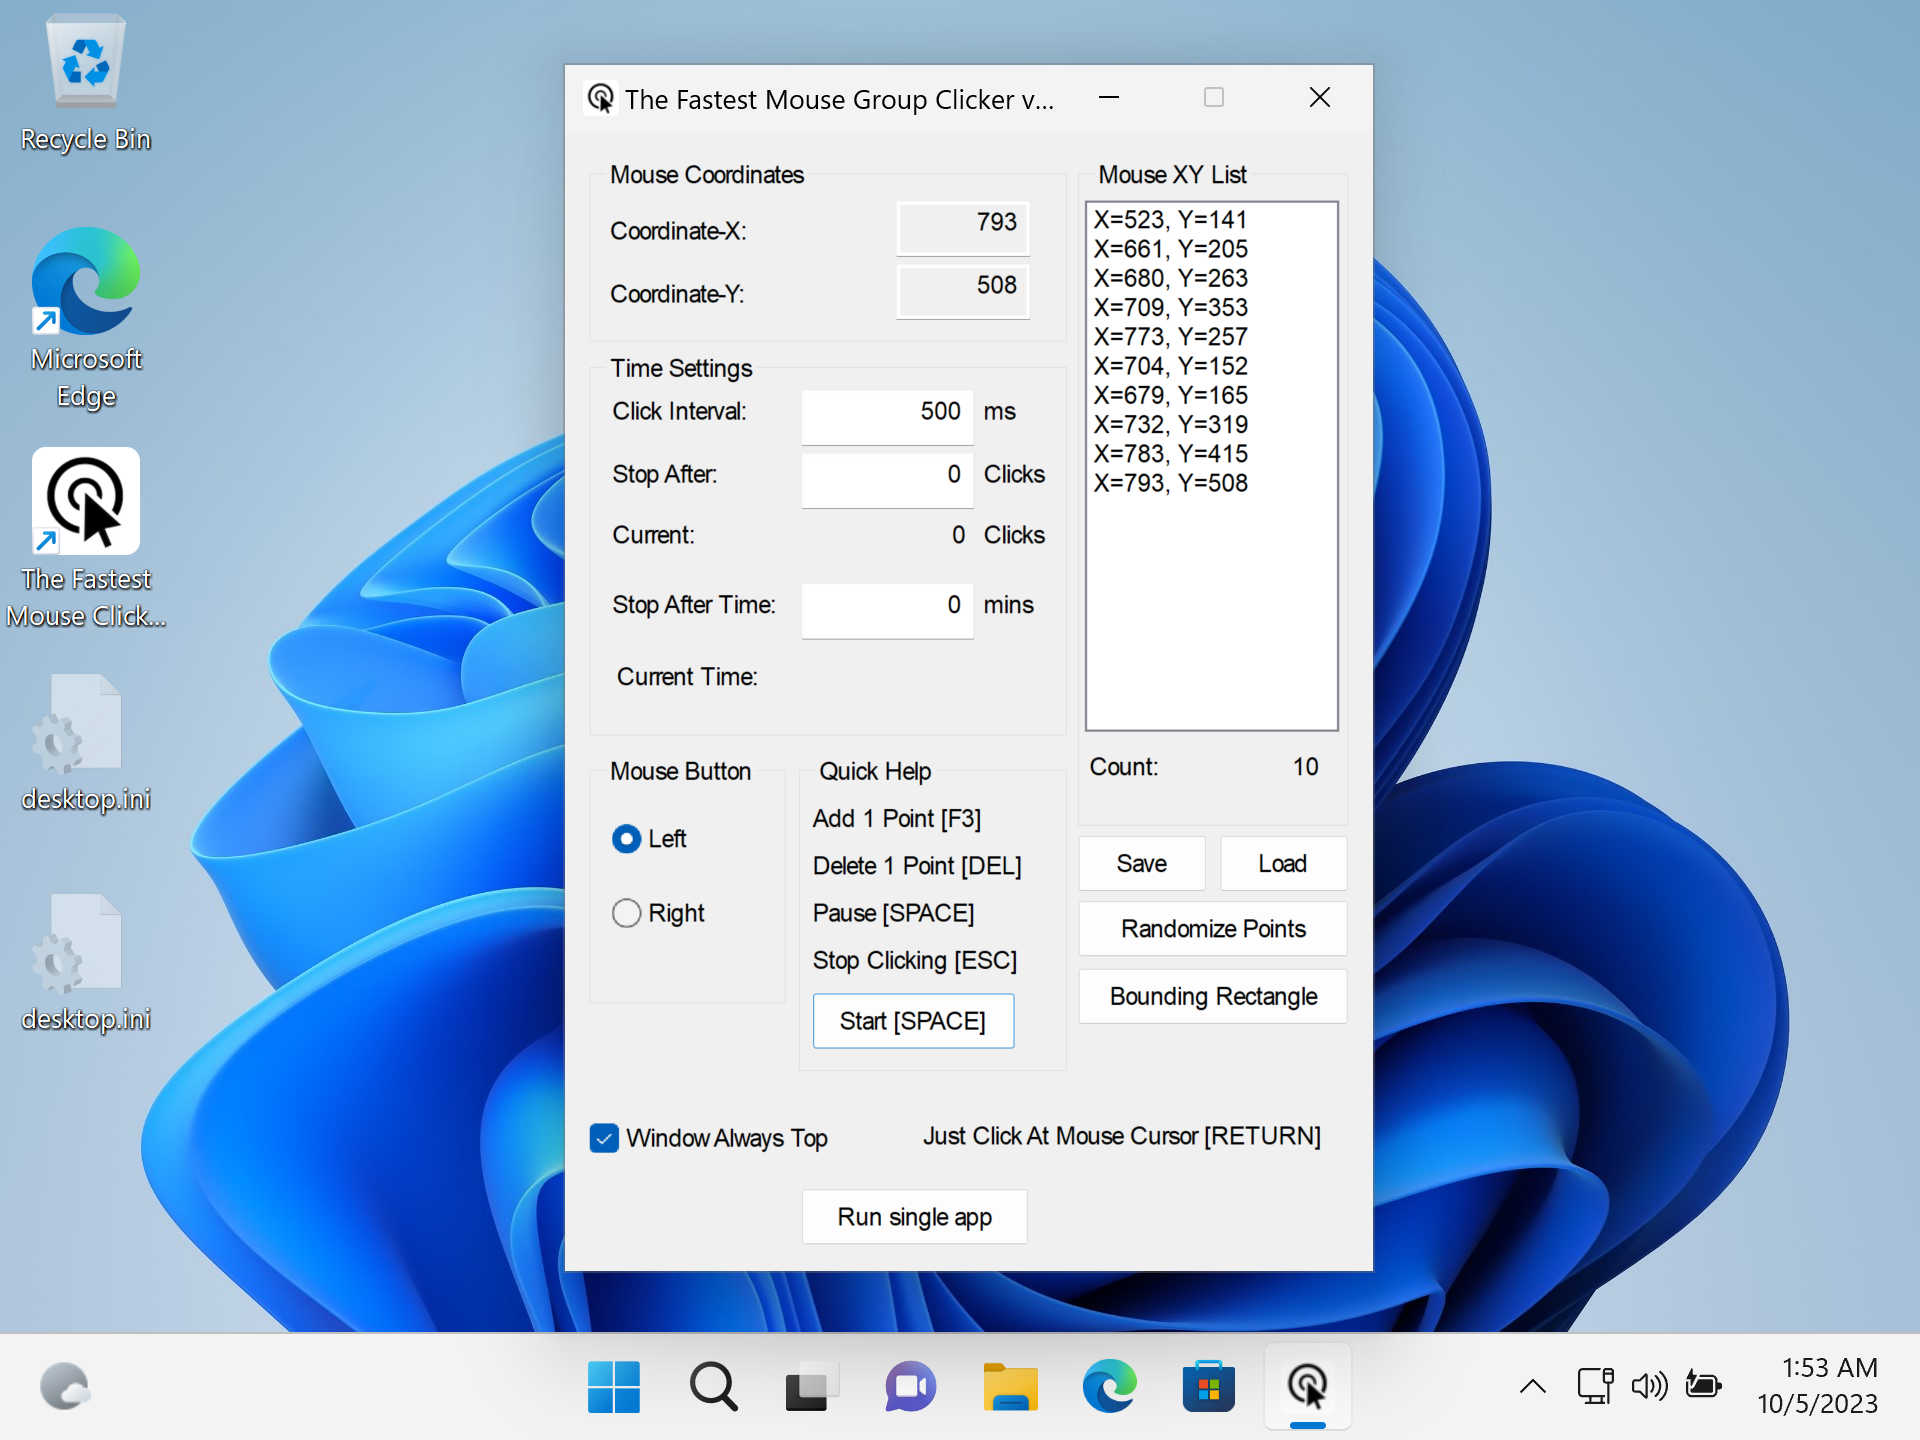 The Fastest Mouse Clicker for Windows version 2.6.1.0 - Brand new Windows 11 22H2 screenshot (group application).